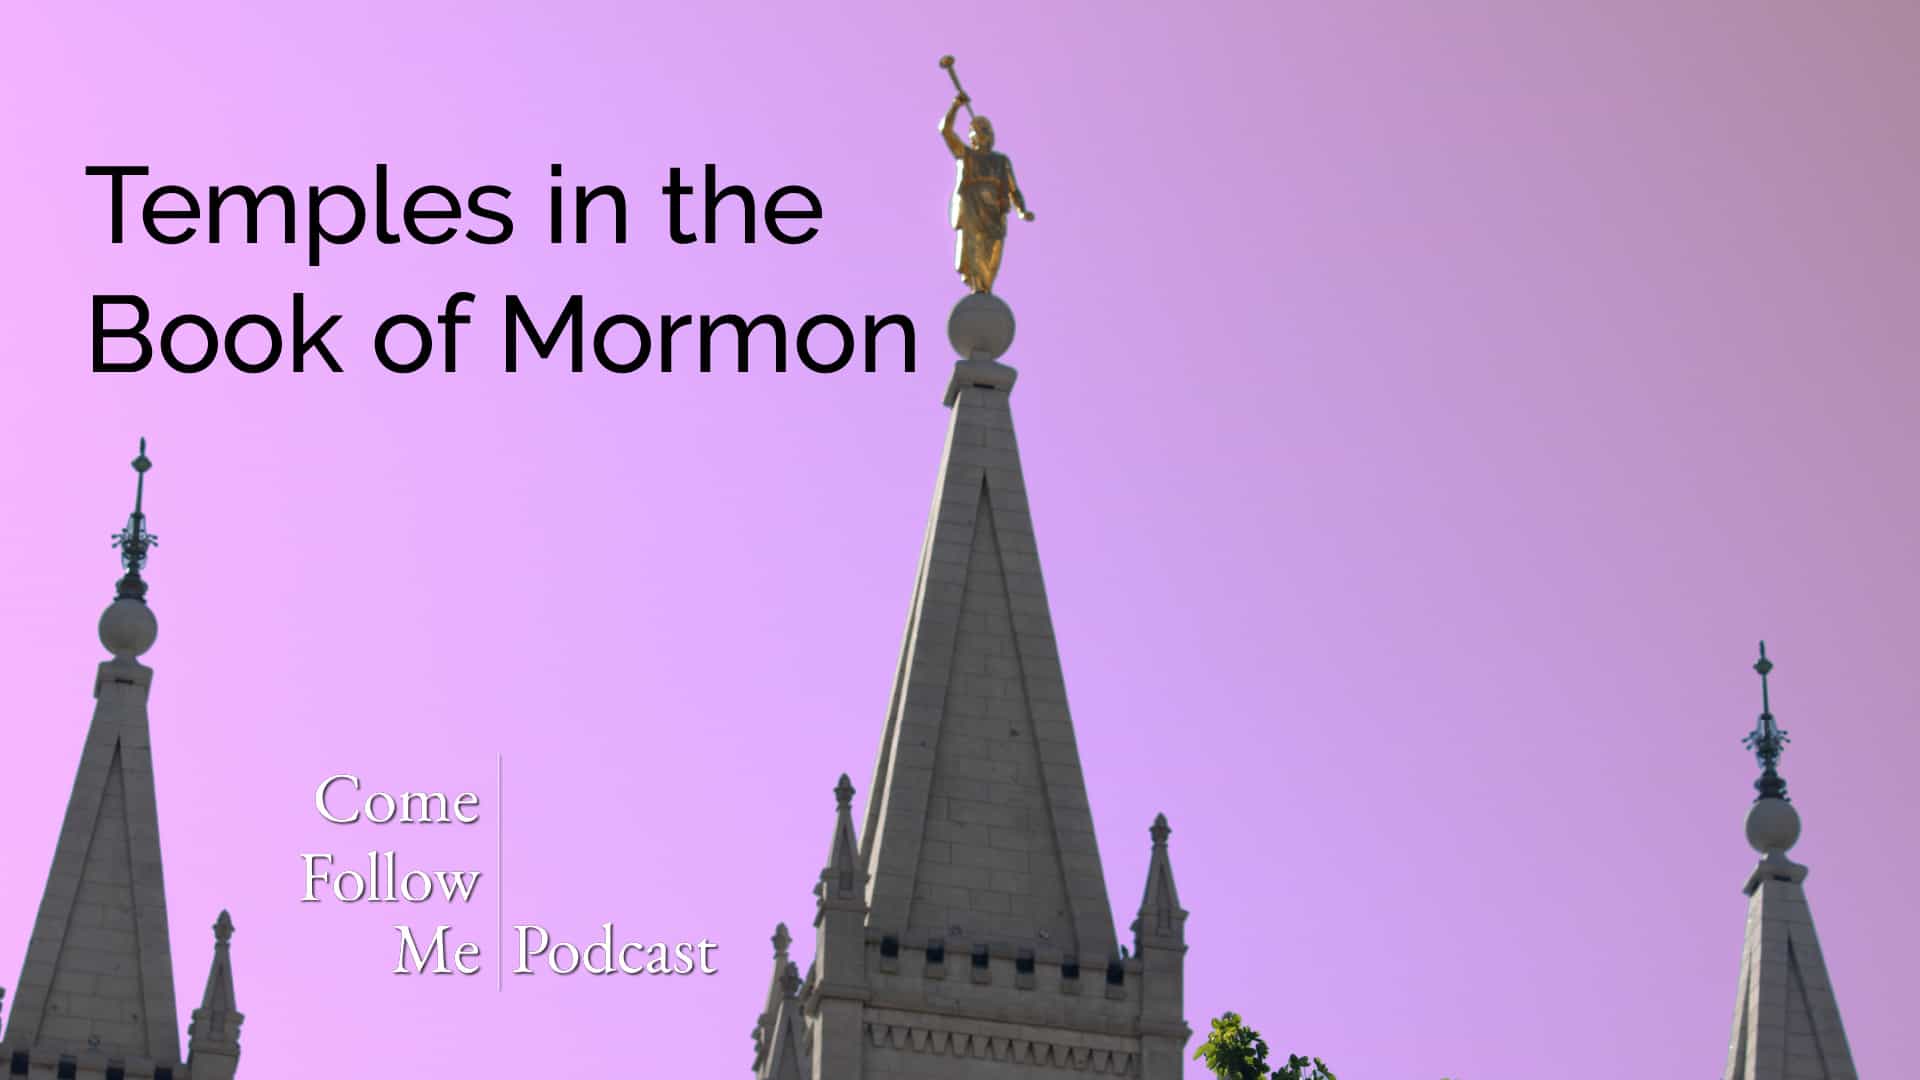 Temples in the Book of Mormon